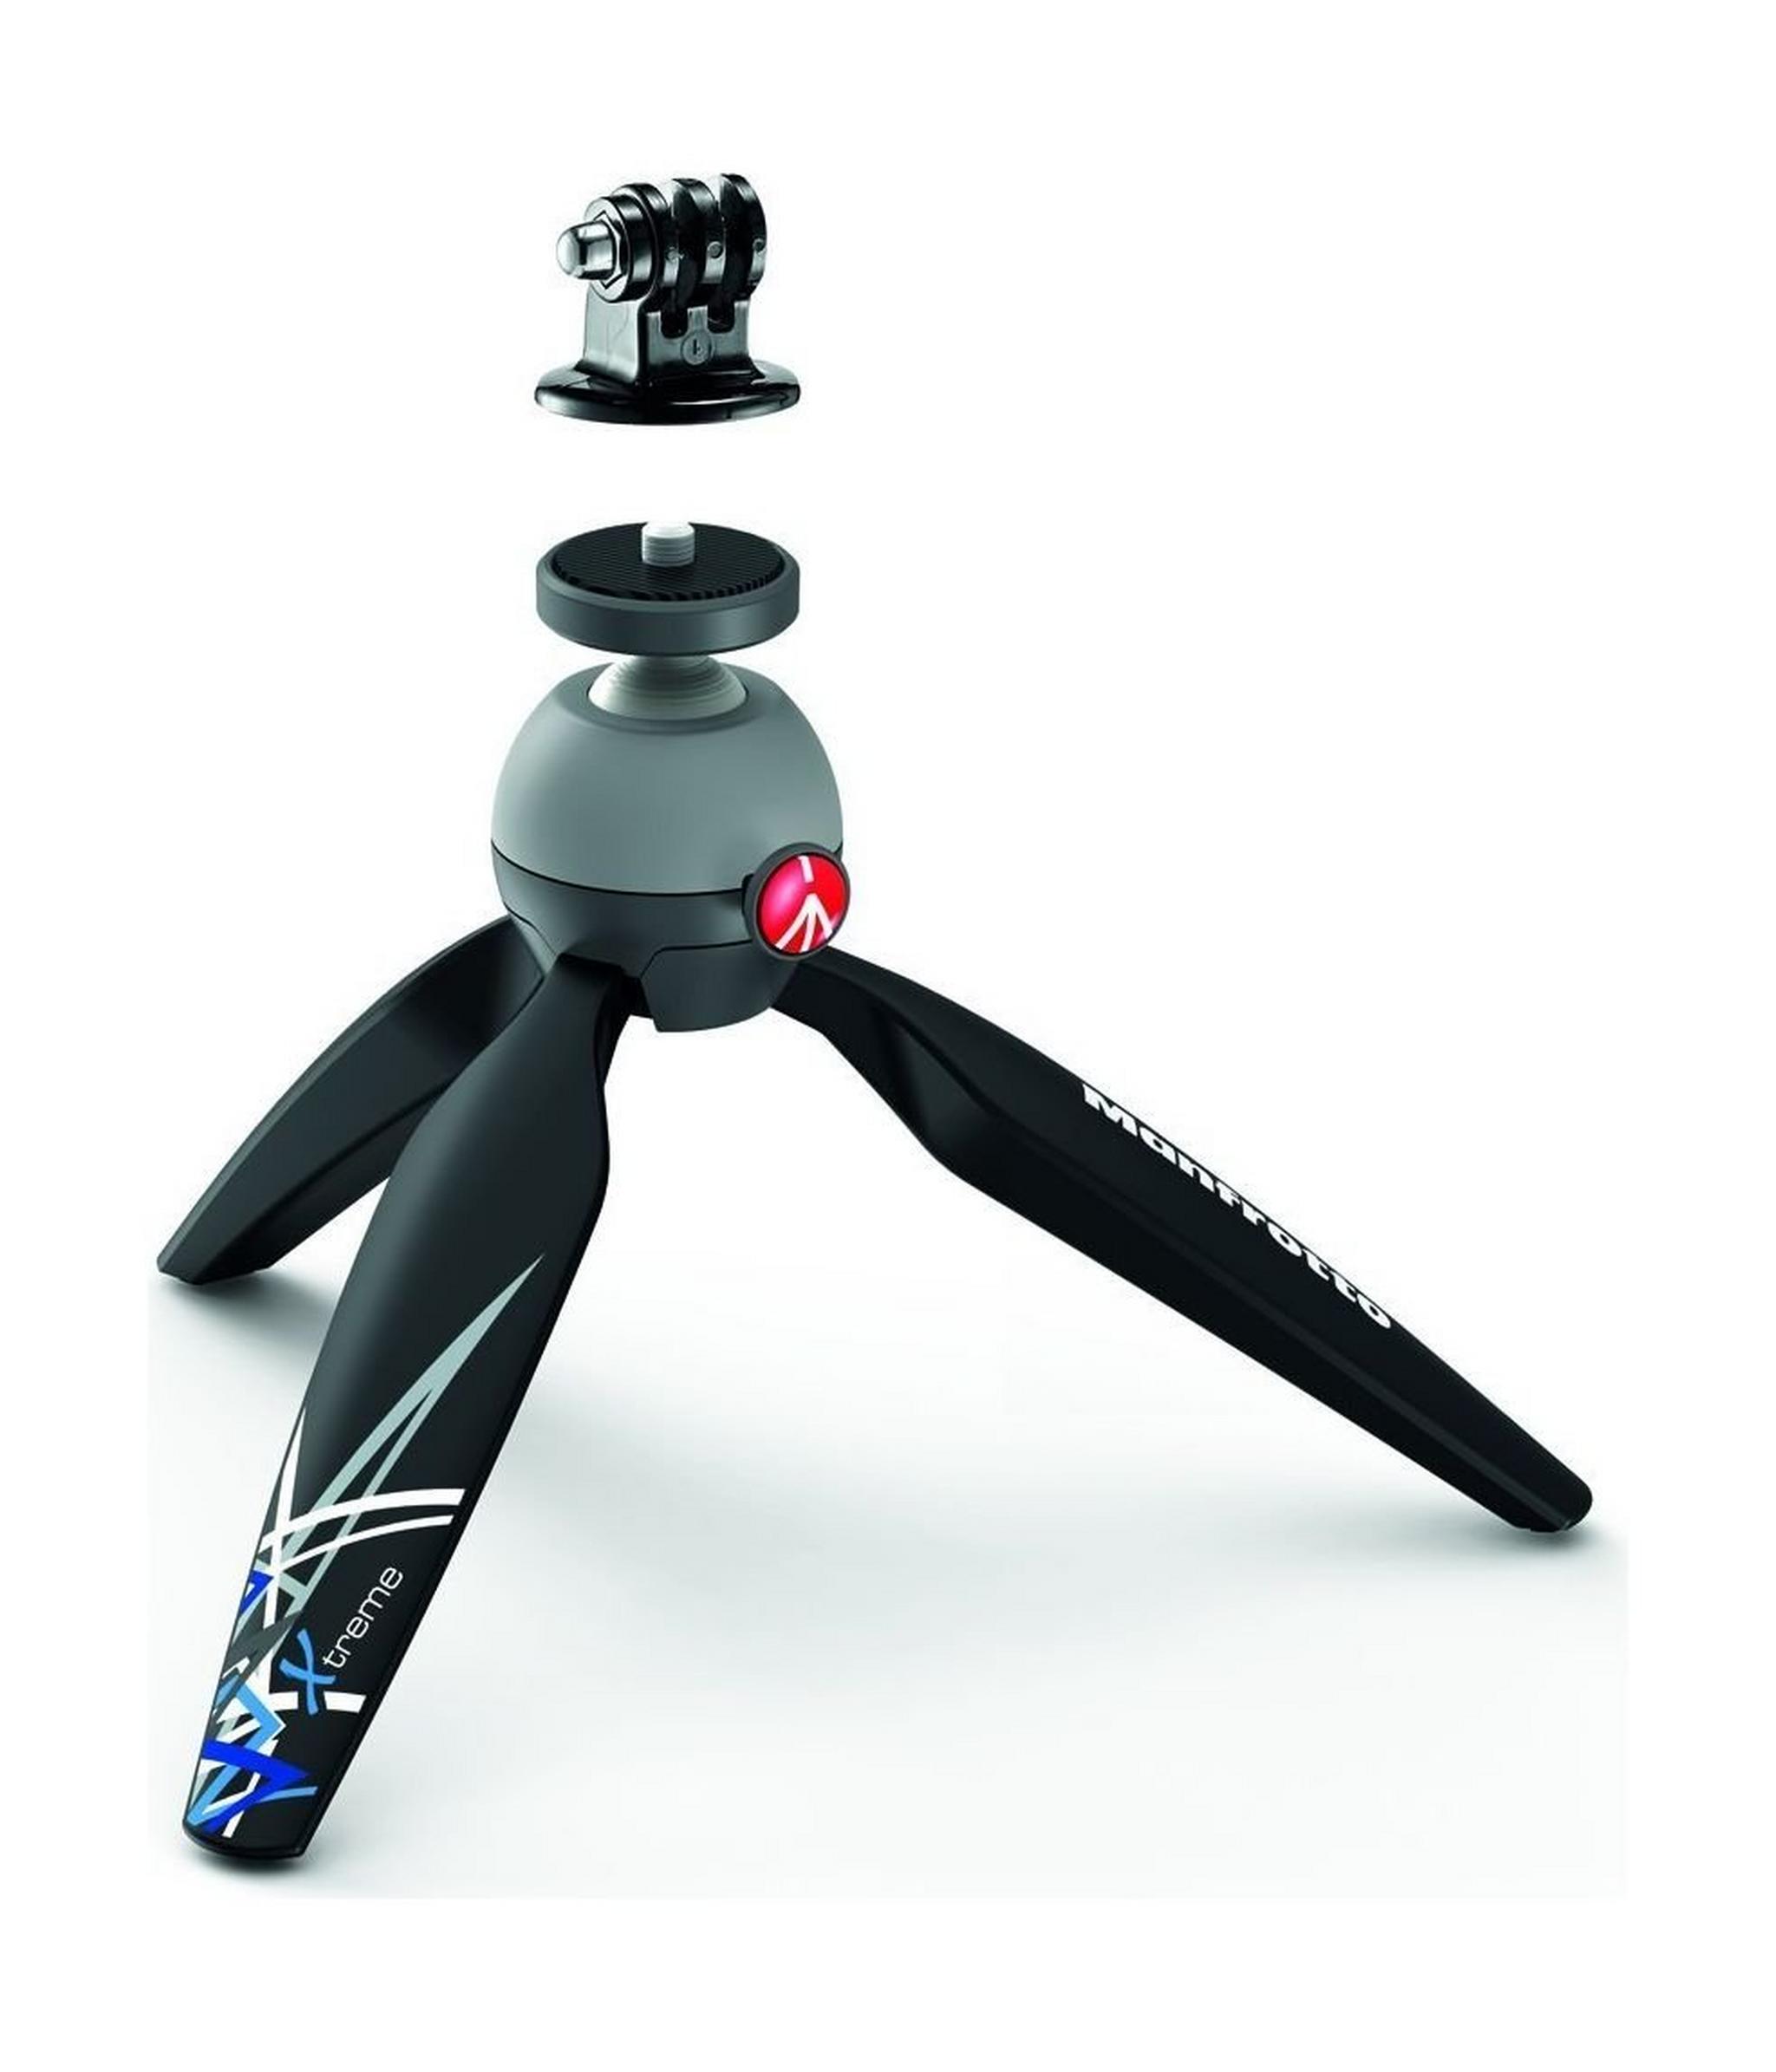 Manfrotto Pixi Mini Tripod with GoPro Adapter